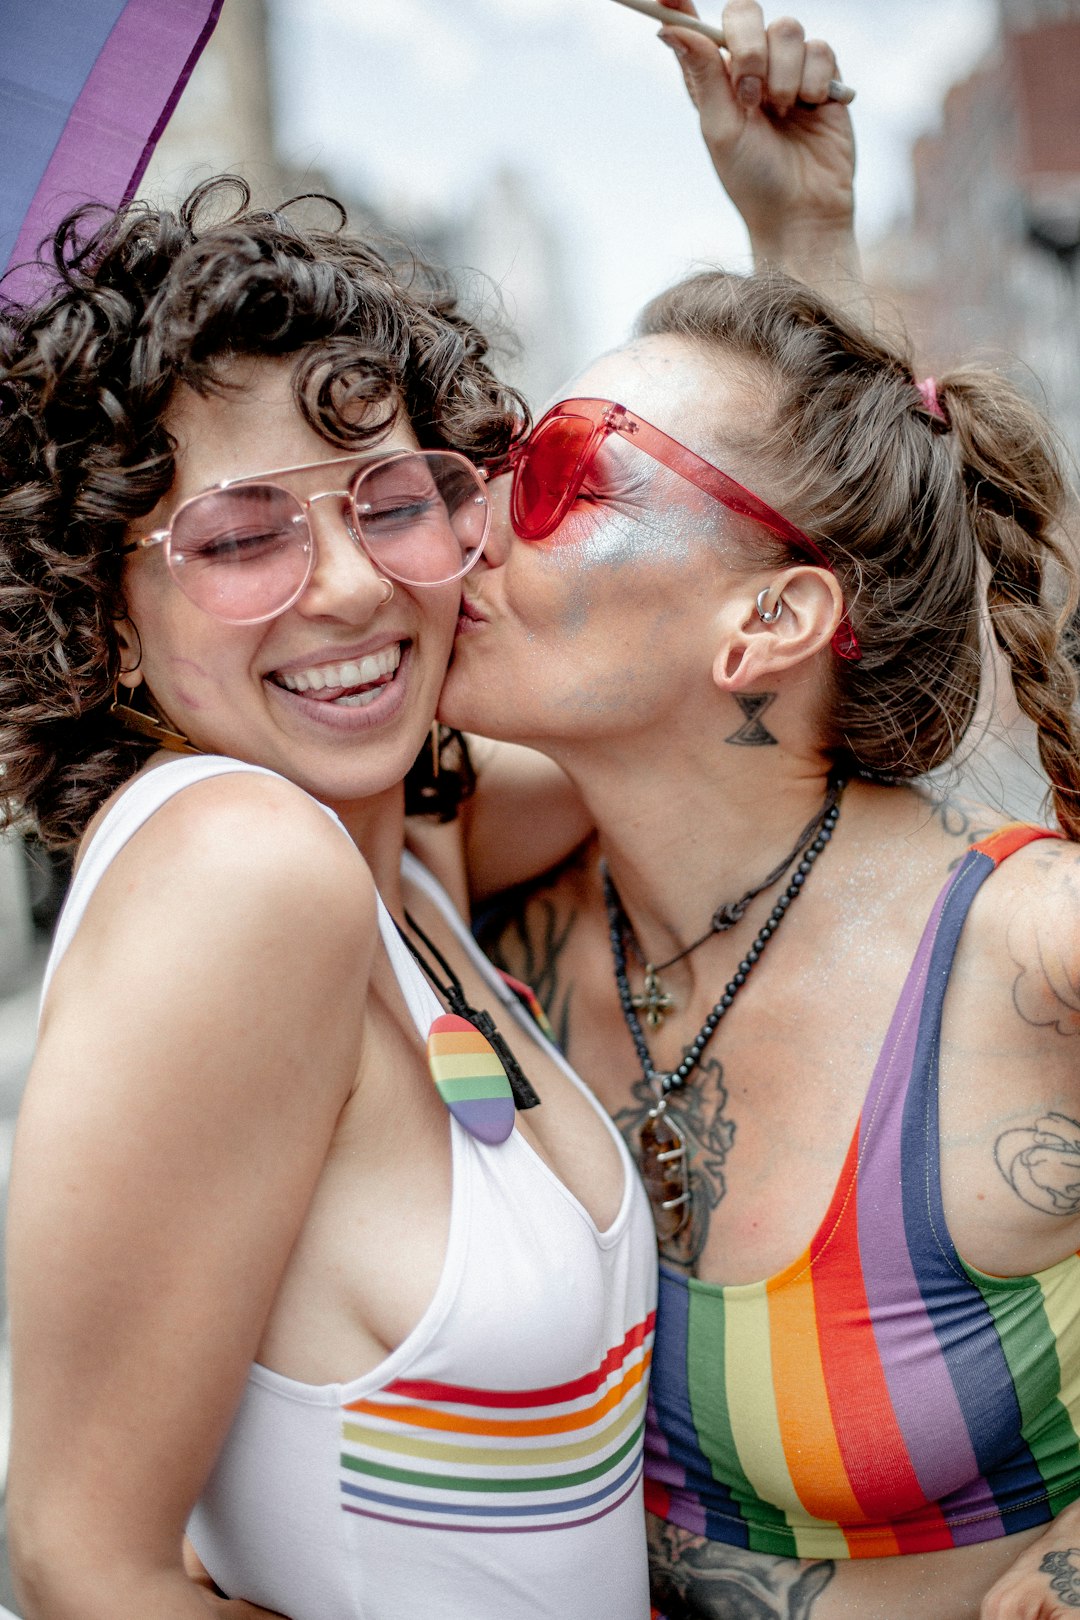 I was walking around at Pride 2019 in New York to portrait interesting people and scenes. 

I meet these two women who were so full of joy and happiness and had to try to see if I could capture it somehow. I think it turned out really well and that you feel so much joy looking at how both smile in that kiss. 